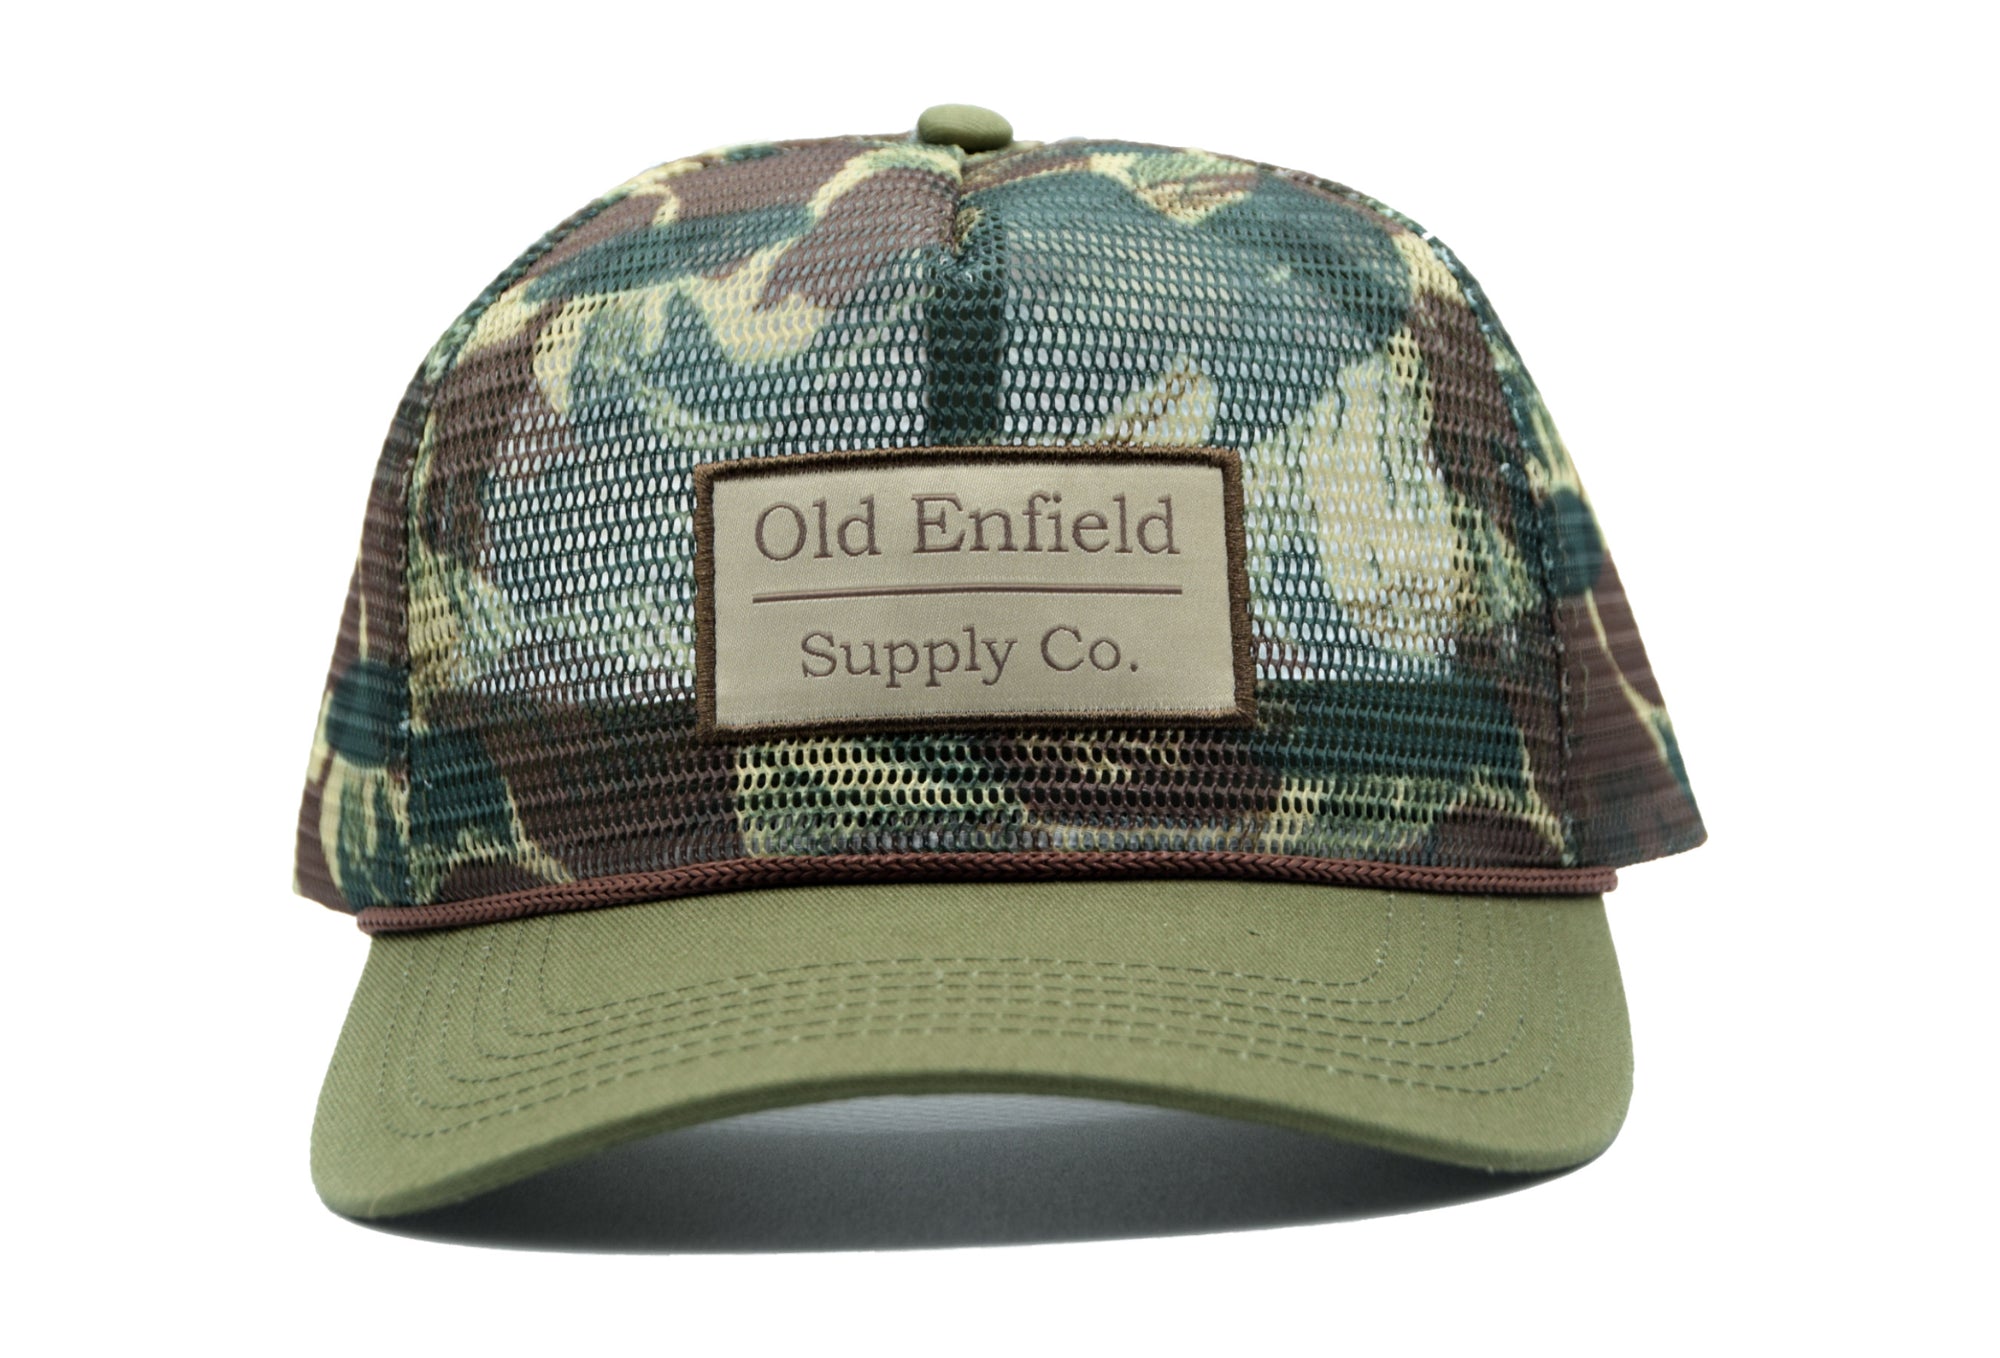 rhodesian brushstroke, camo mesh hat, vintage rope hat, snapback hat mens, vintage camo hat, snapback rope hat, camo trucker hat, hunting, fishing, old enfield supply co.